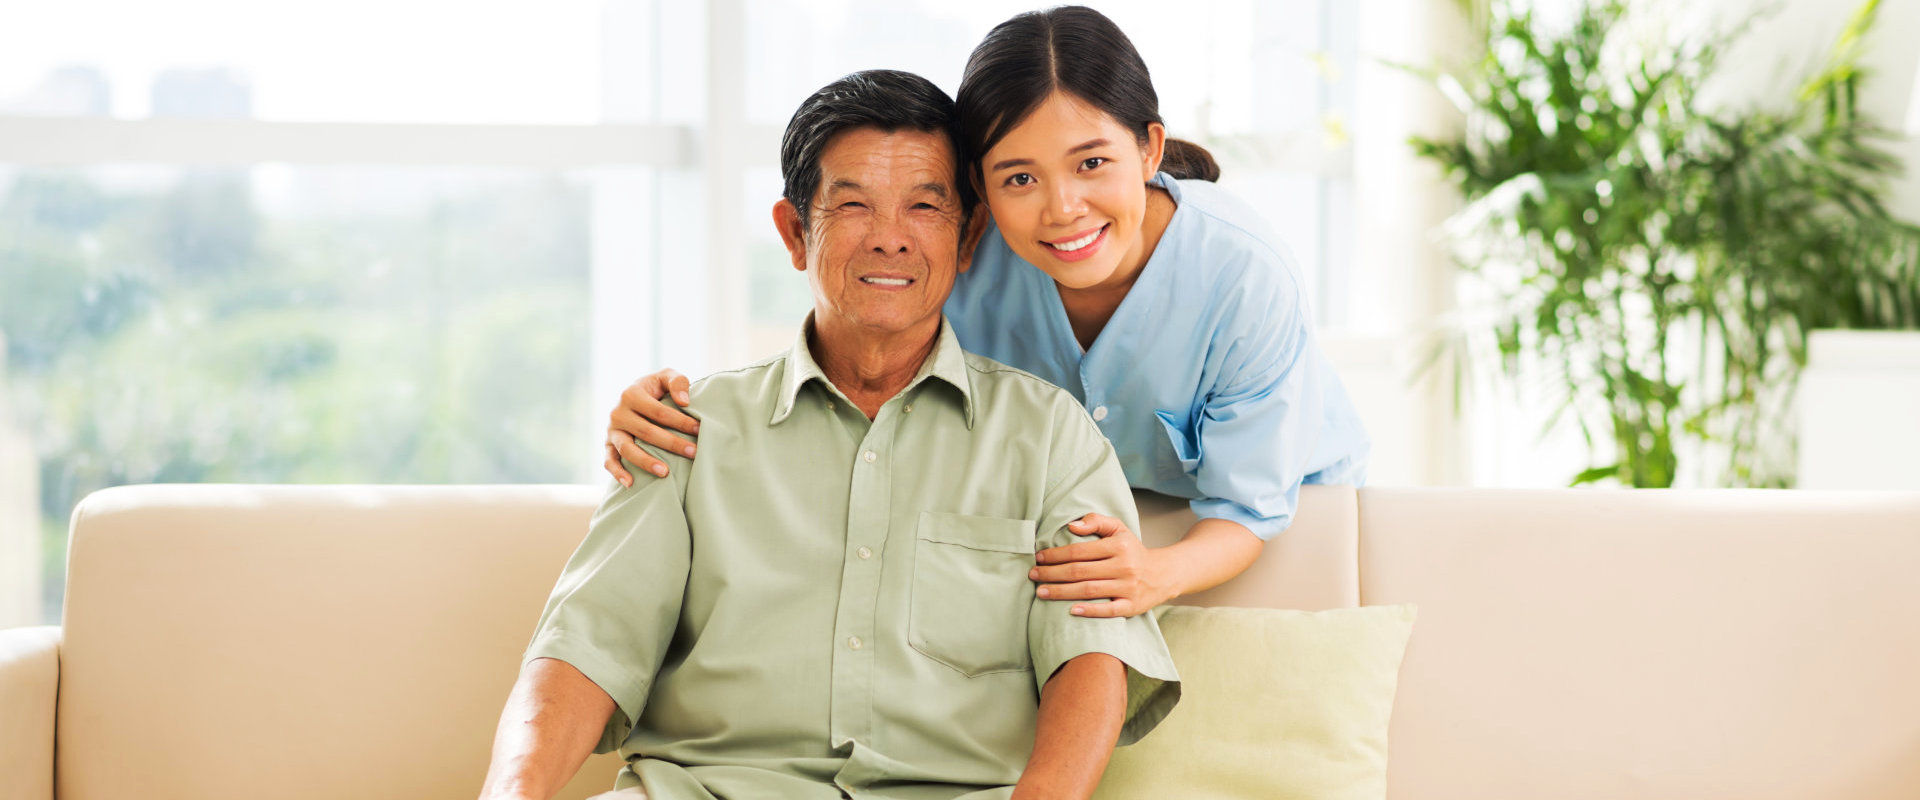 caregiver smiling with elderly man sitting on couch